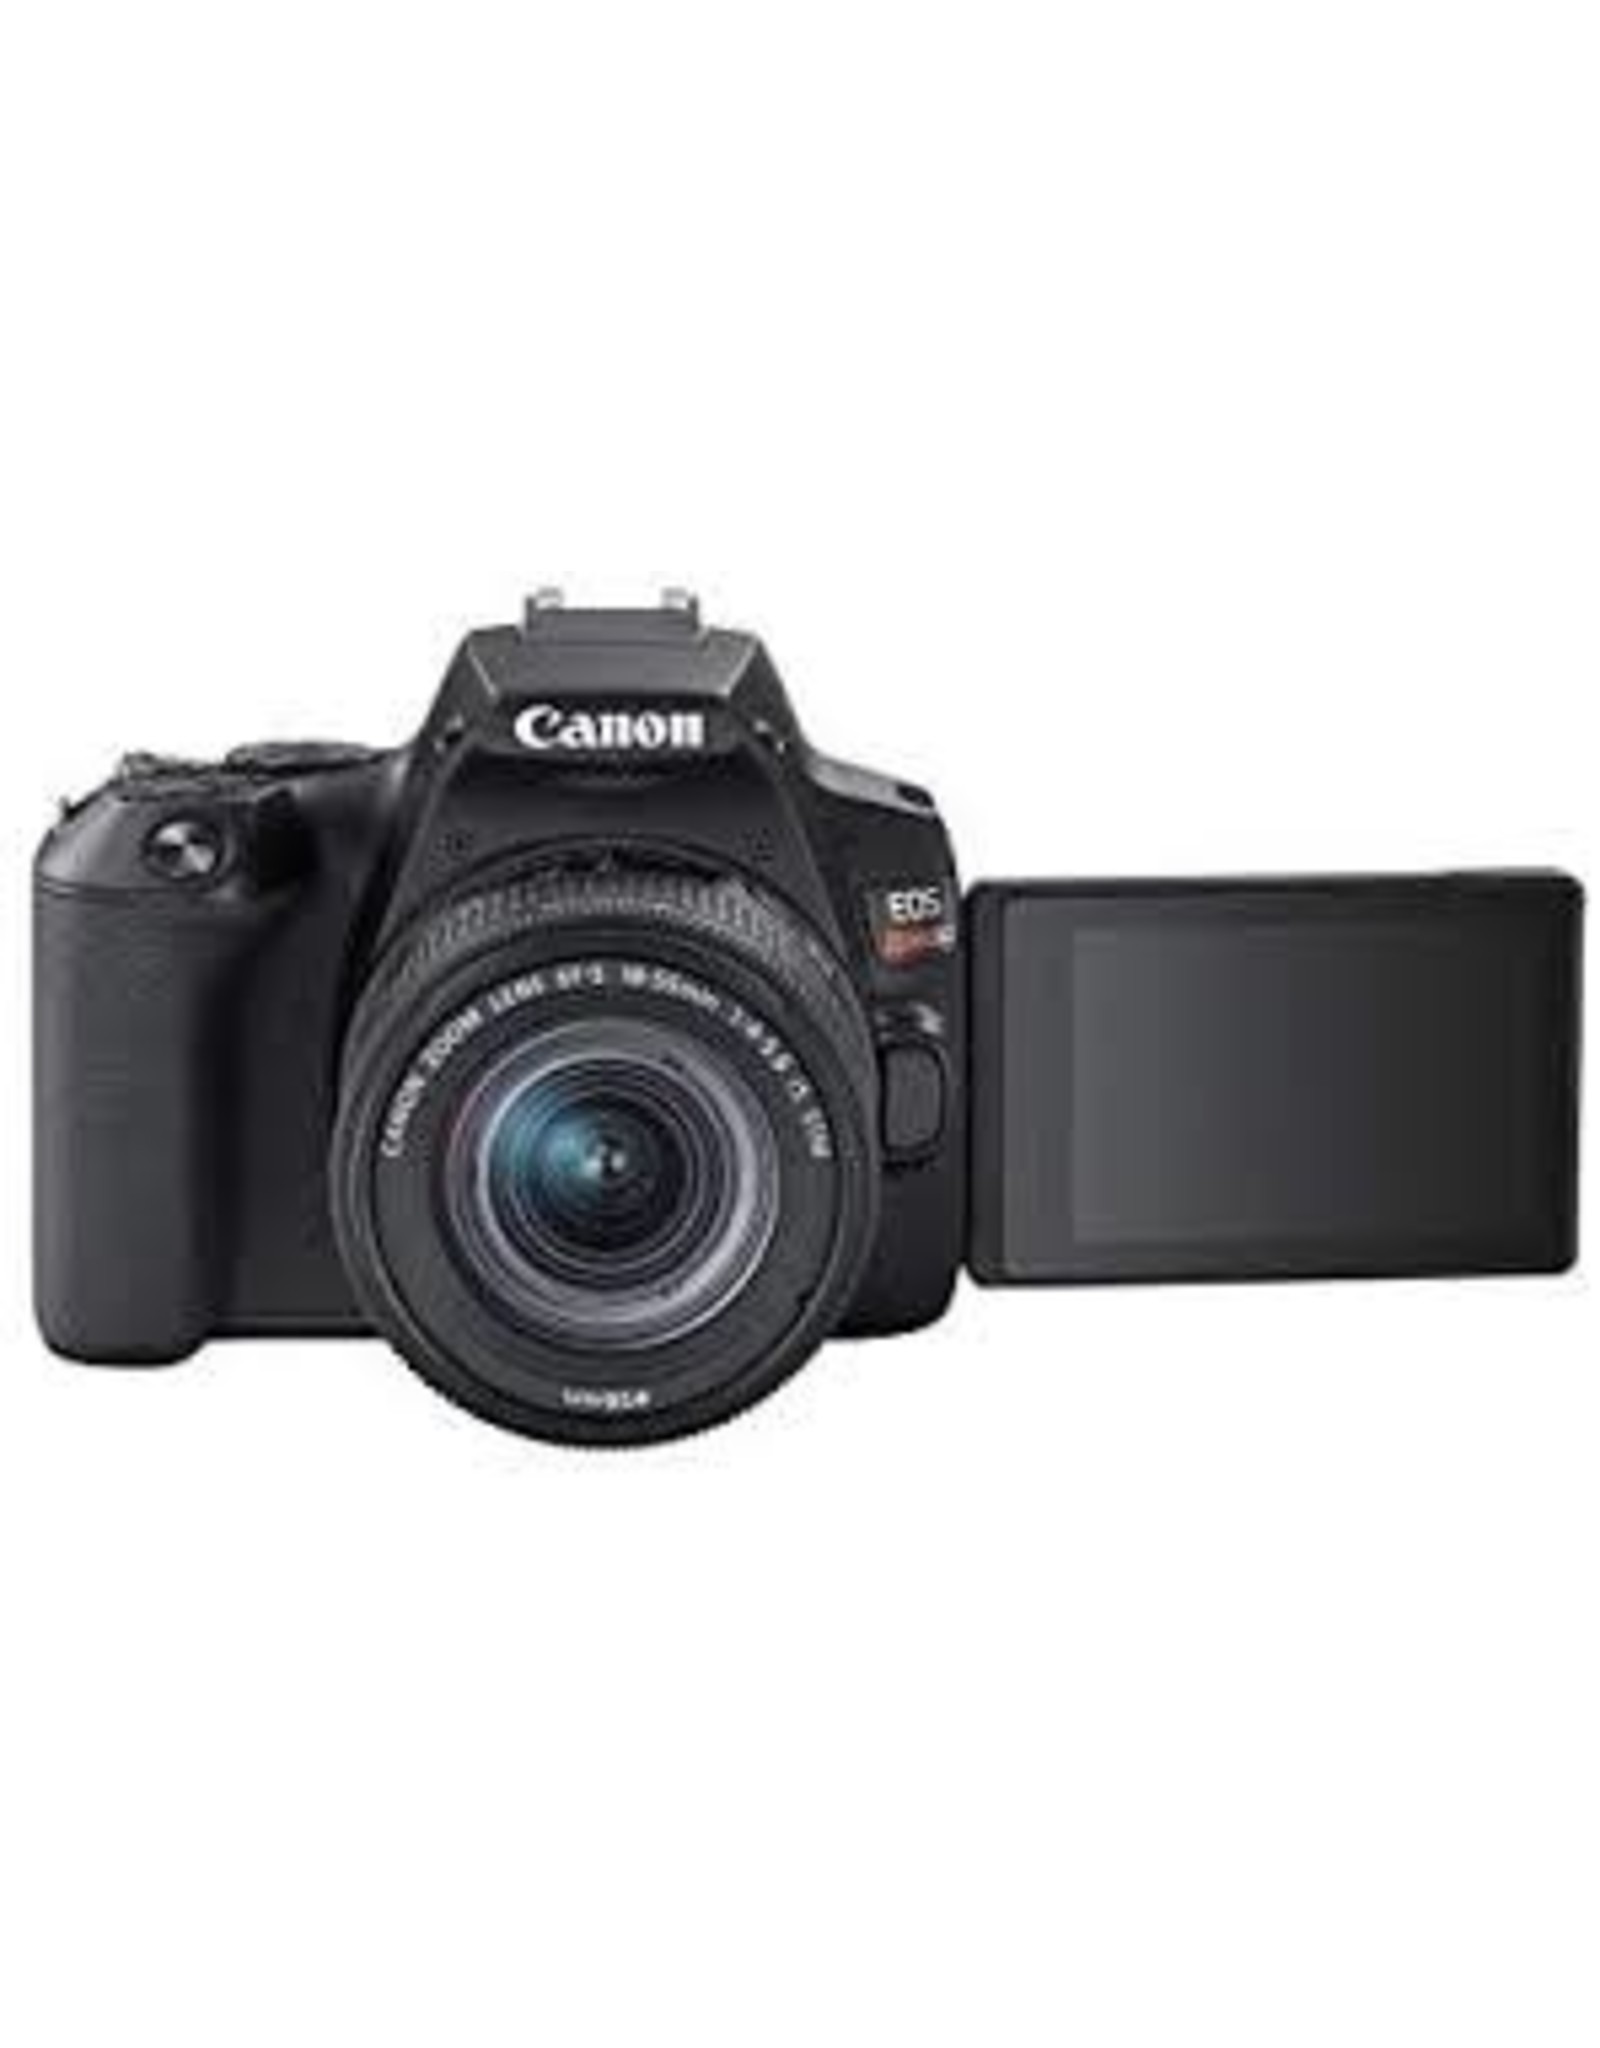 Canon EOS M50 Mark II Mirrorless Camera with 15-45mm Lens